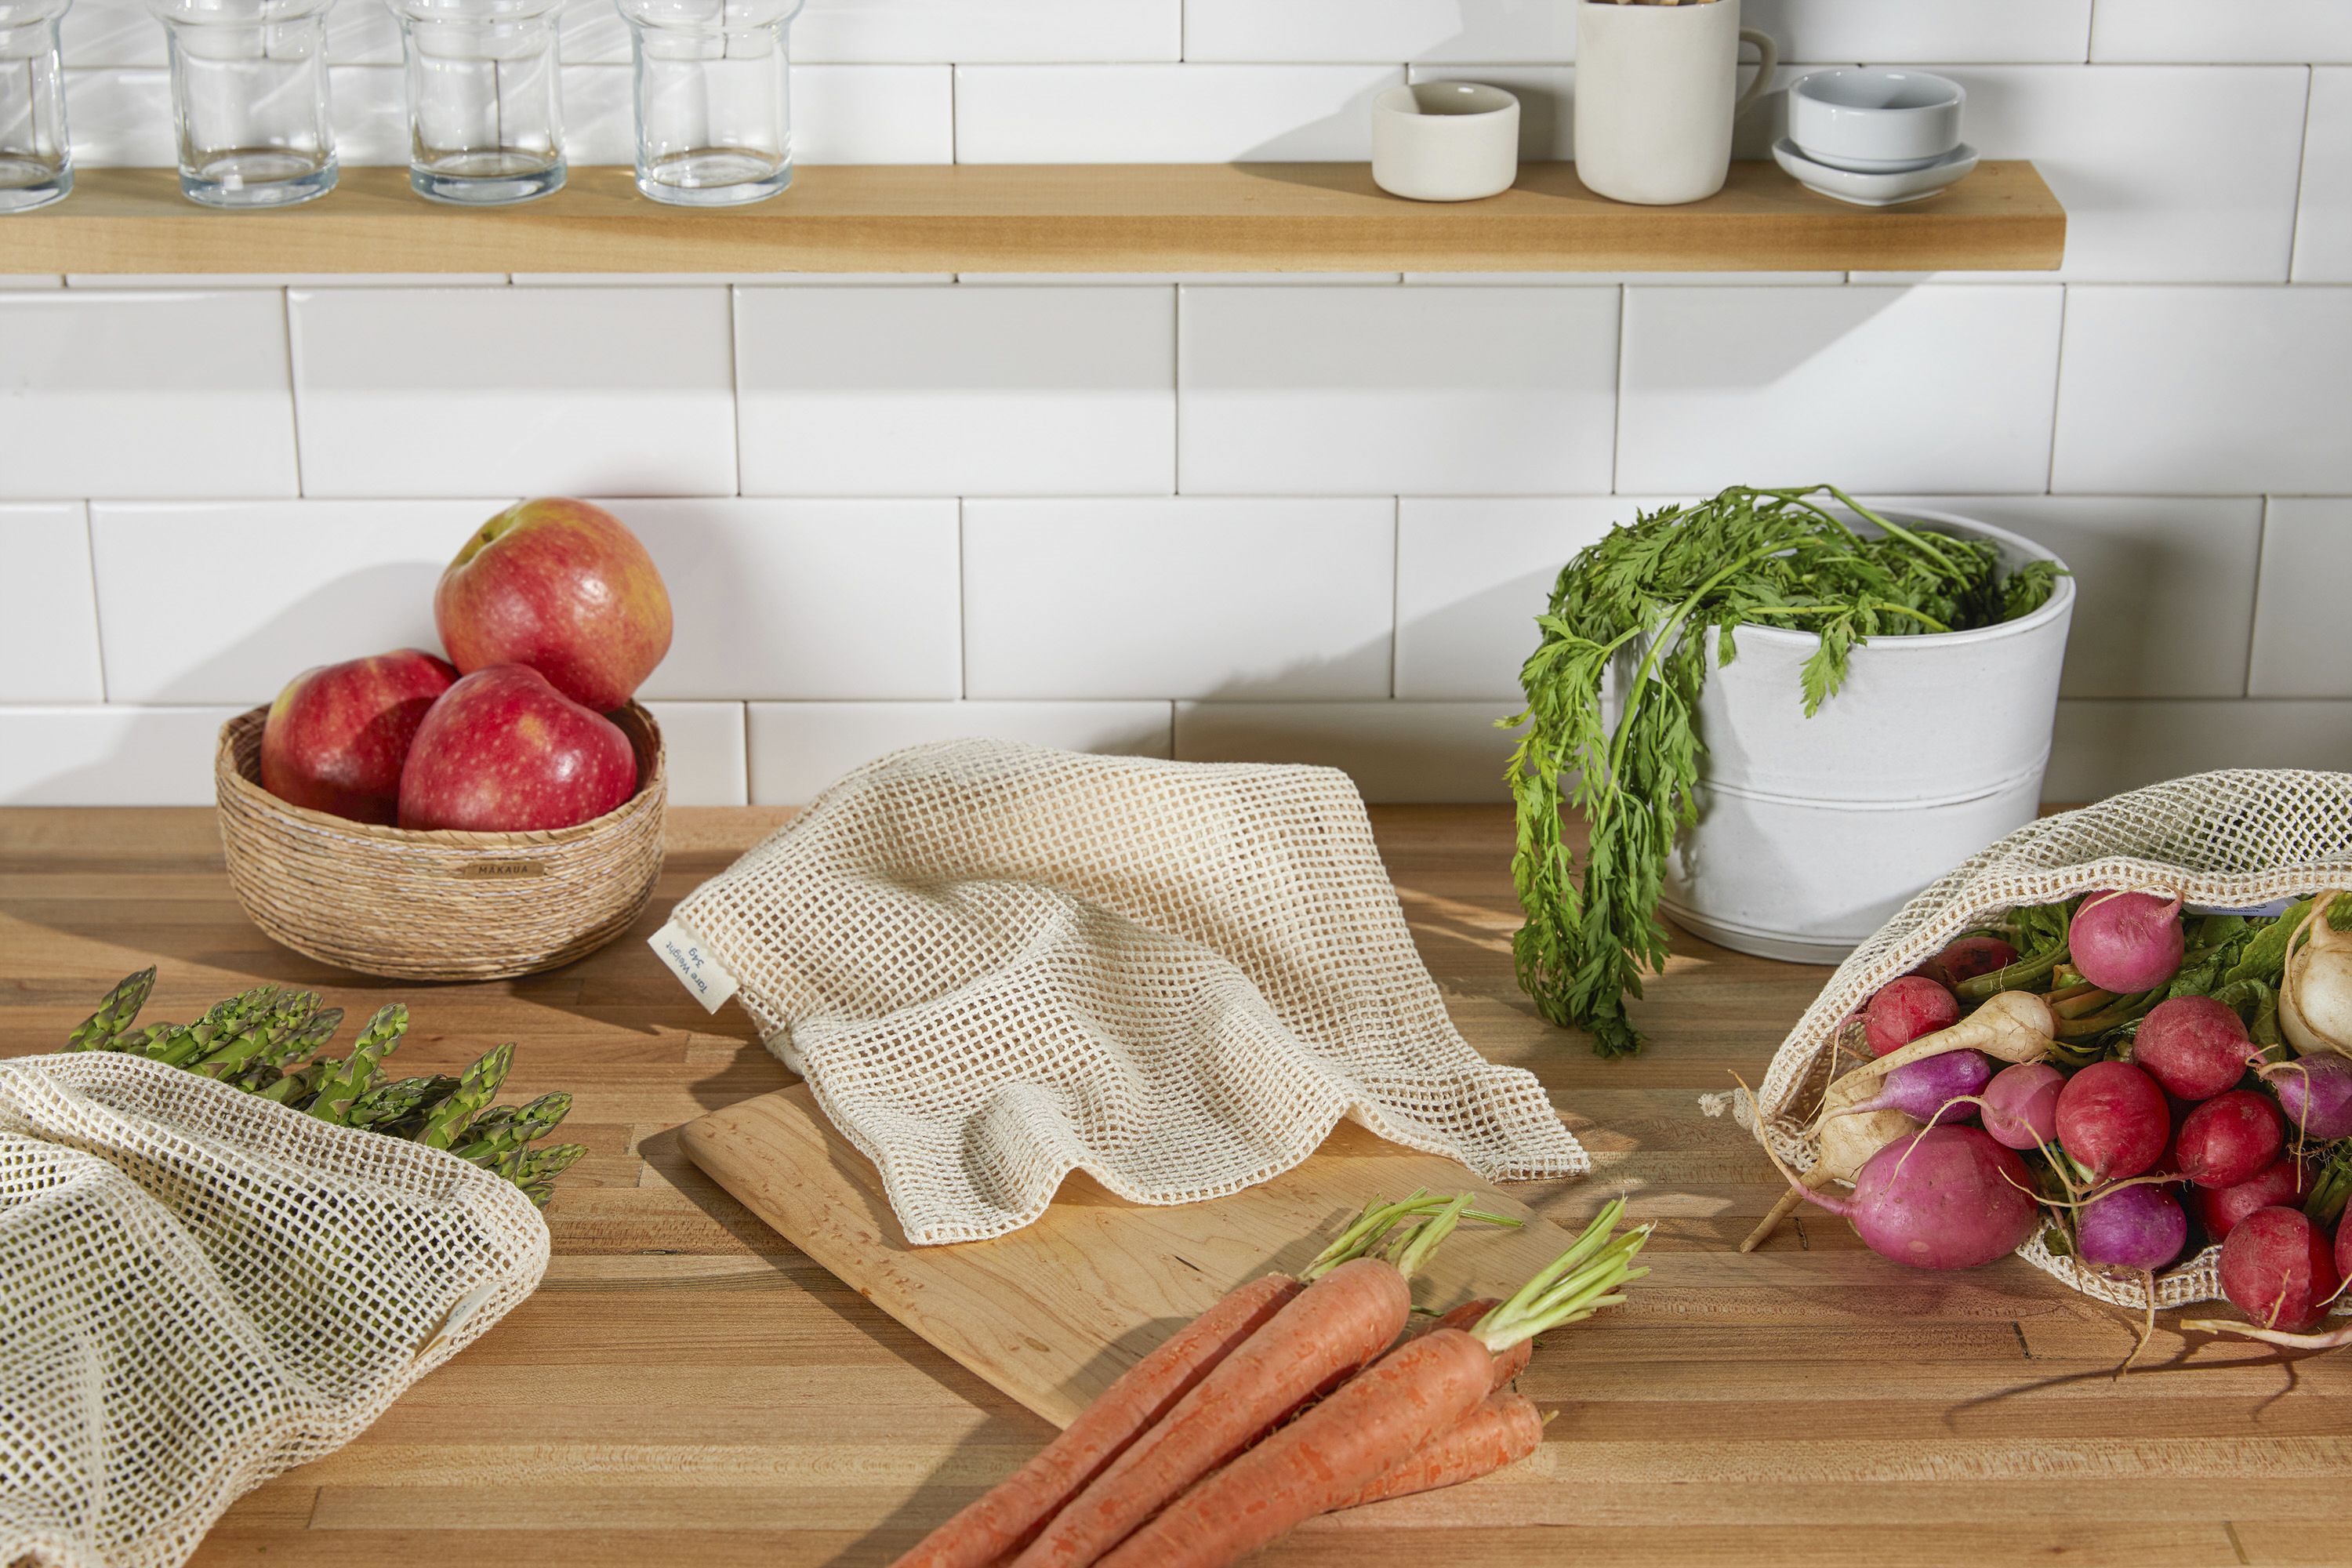 Photo of mesh produce bags with produce on countertop